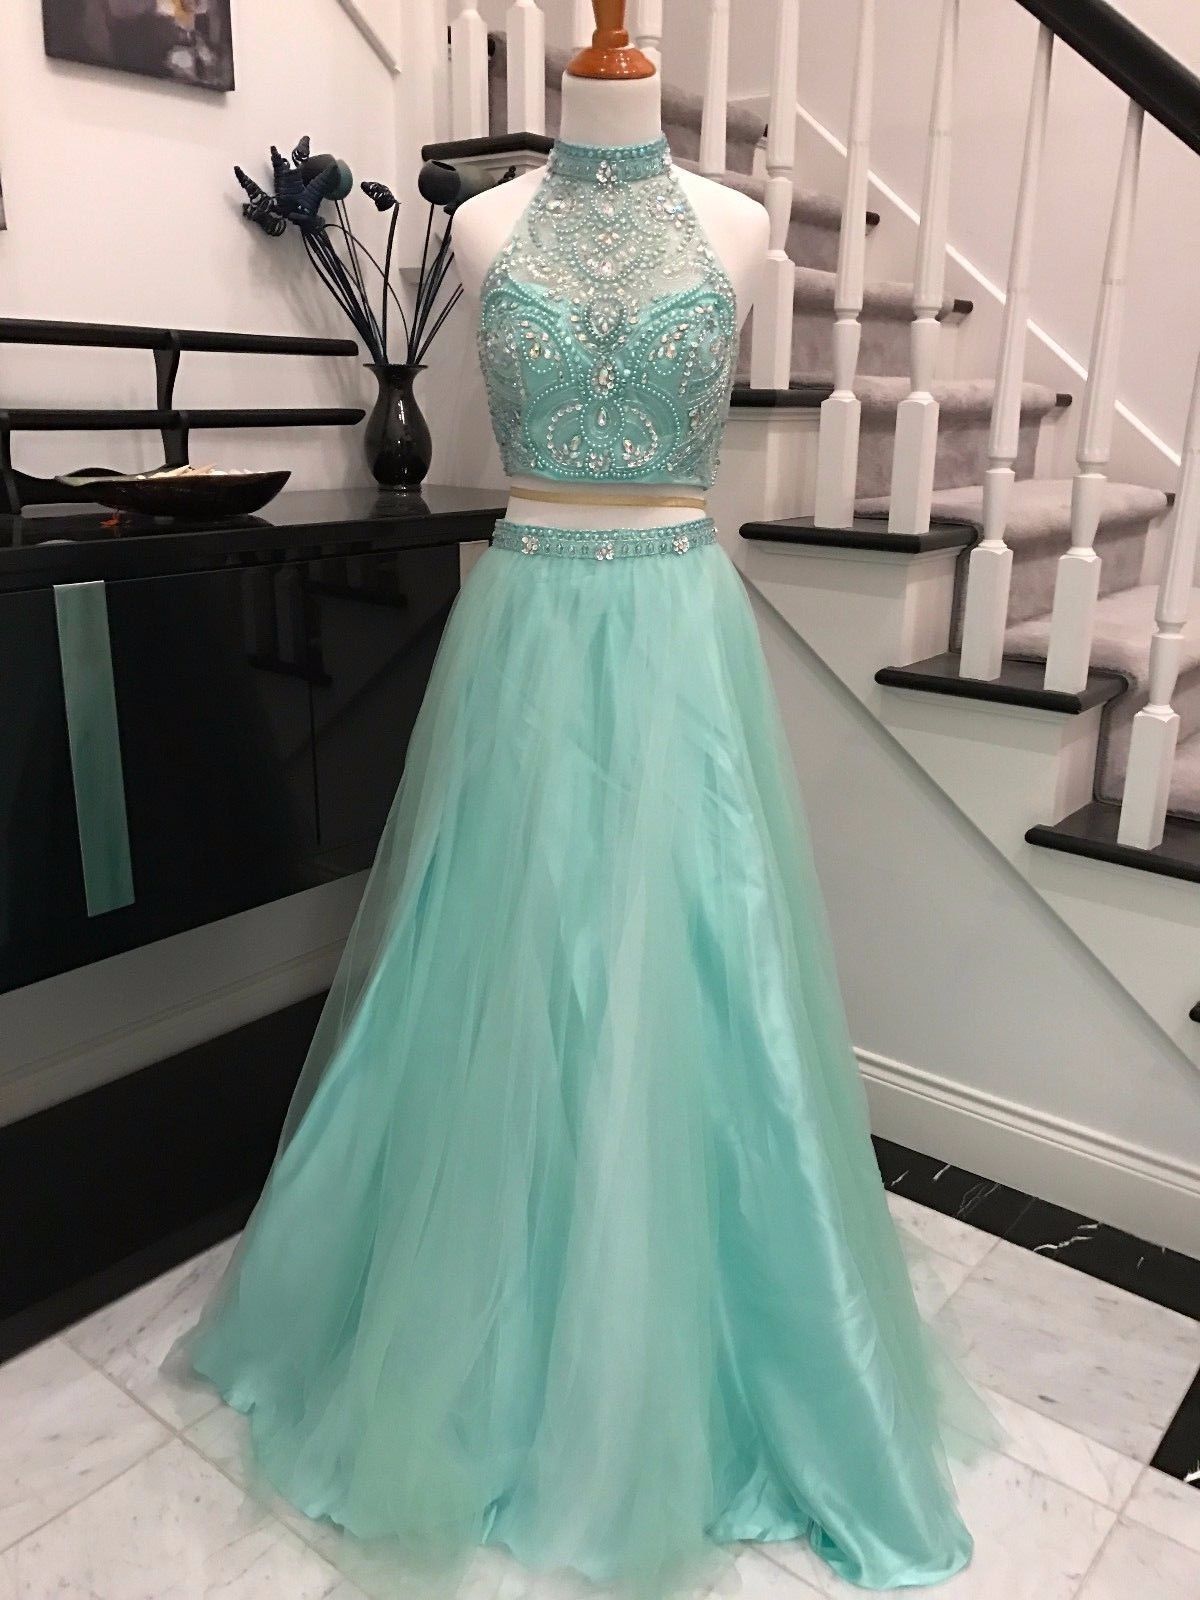 Beaded Embellished Two-Piece Prom Dress, Featuring High Halter Crop Top and Floor Length Tulle A-Line Skirt